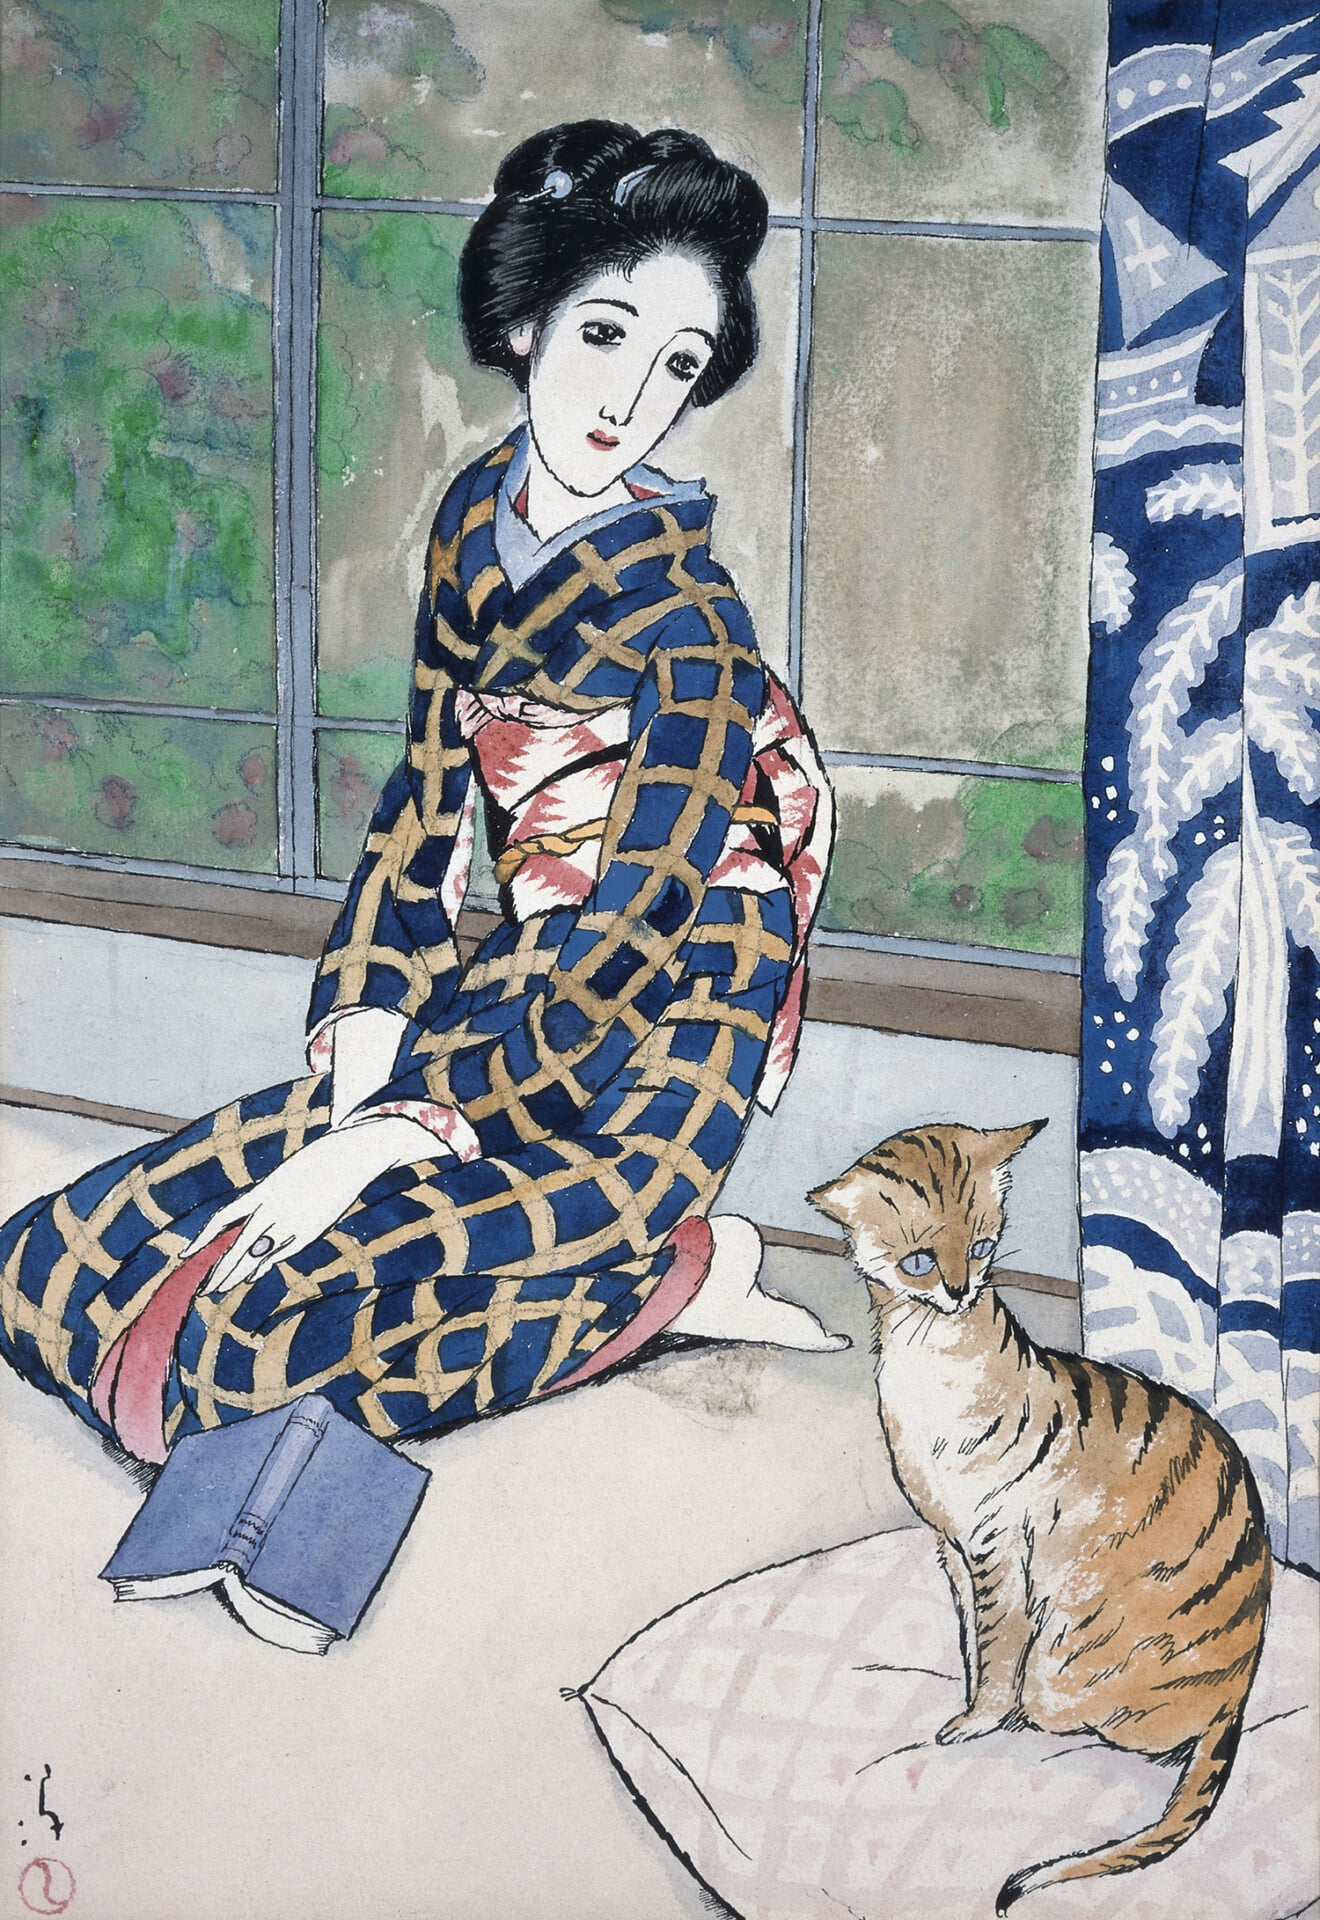 Late Spring, 1926, Pen, pencil and watercolor on paper, Collection of Yumeji Art Museum